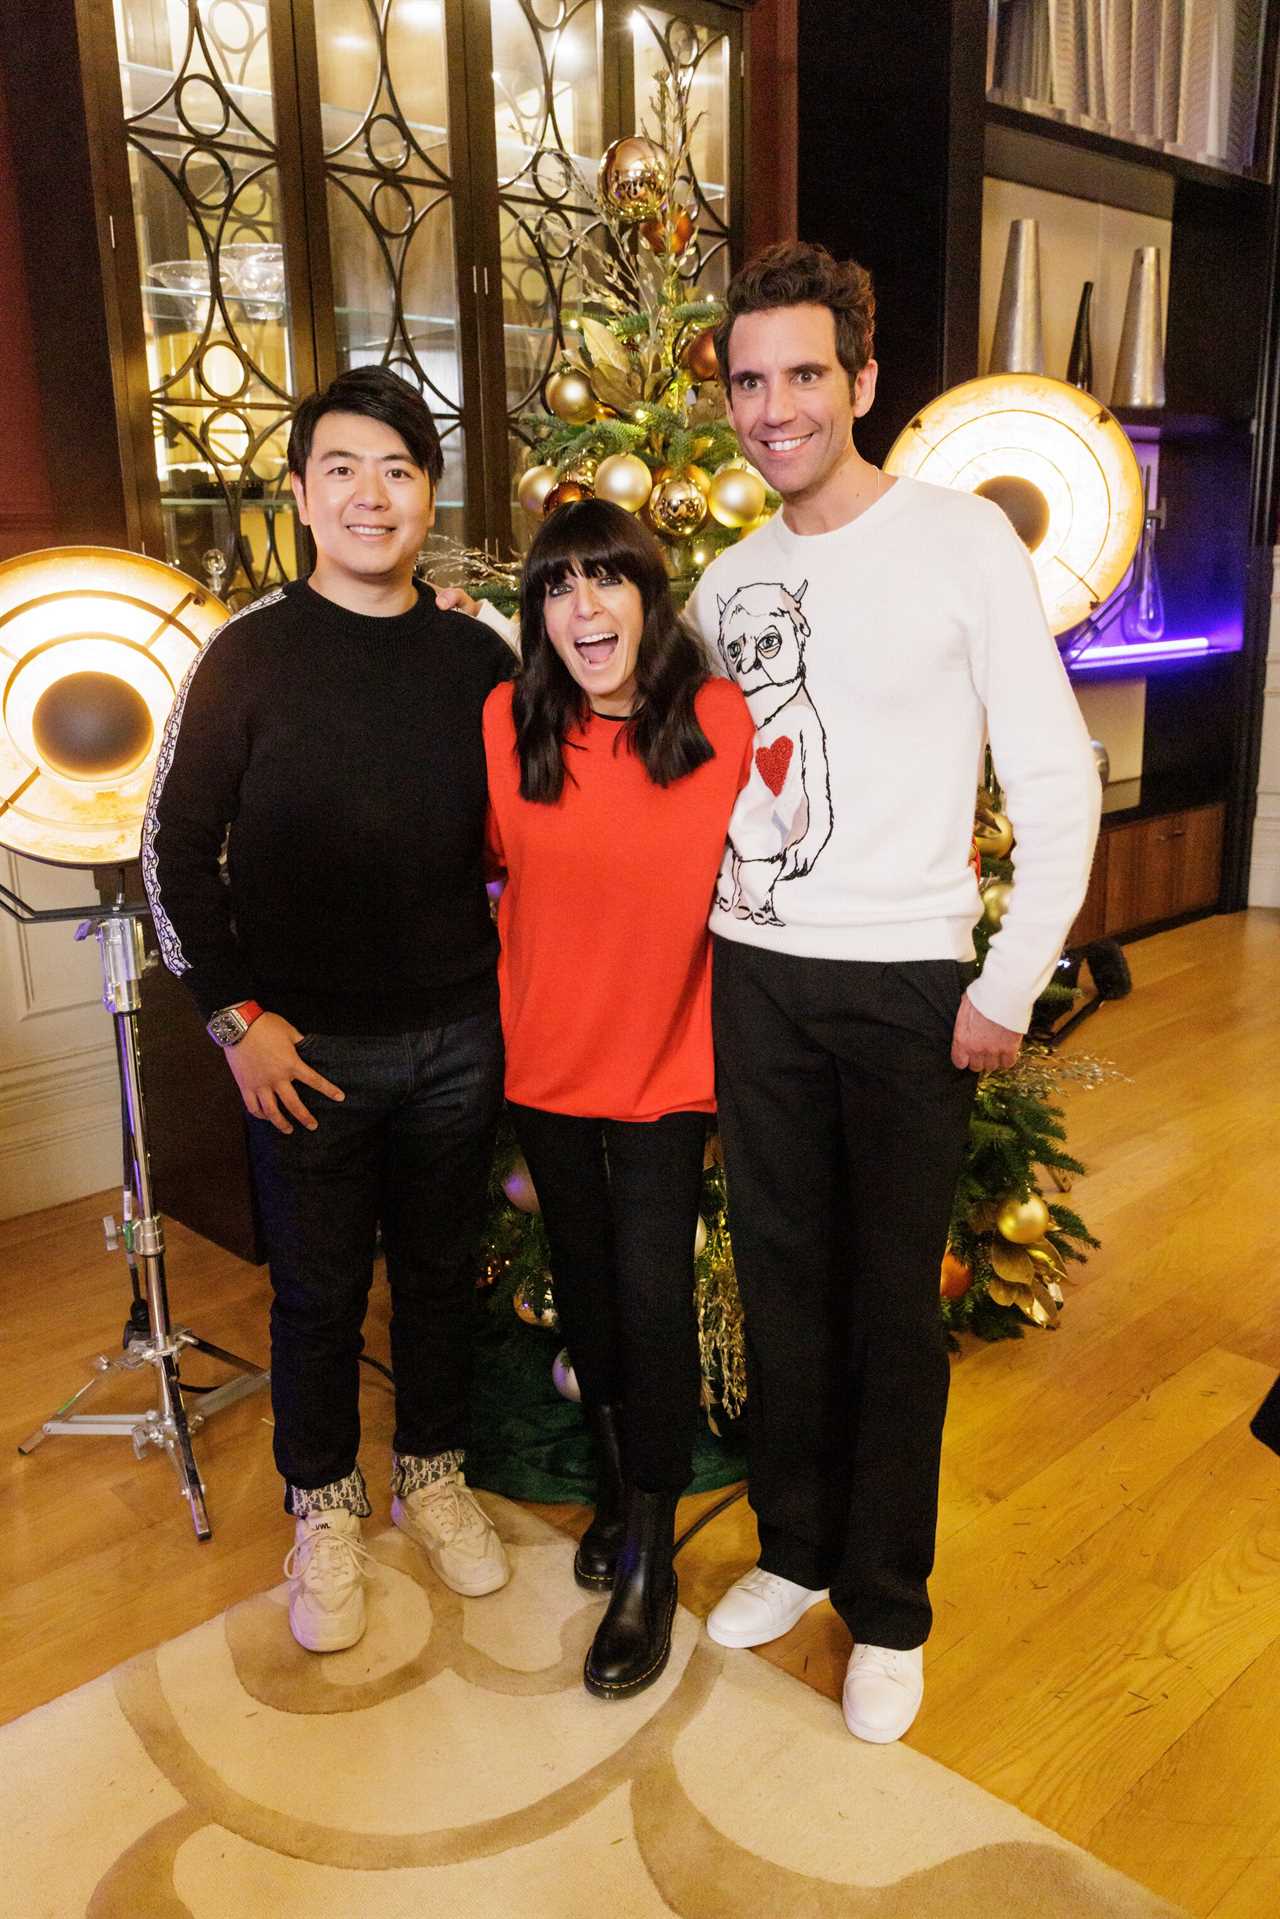 Claudia Winkleman Jokes About Being Fired Amid Huge Change in Channel 4 Show